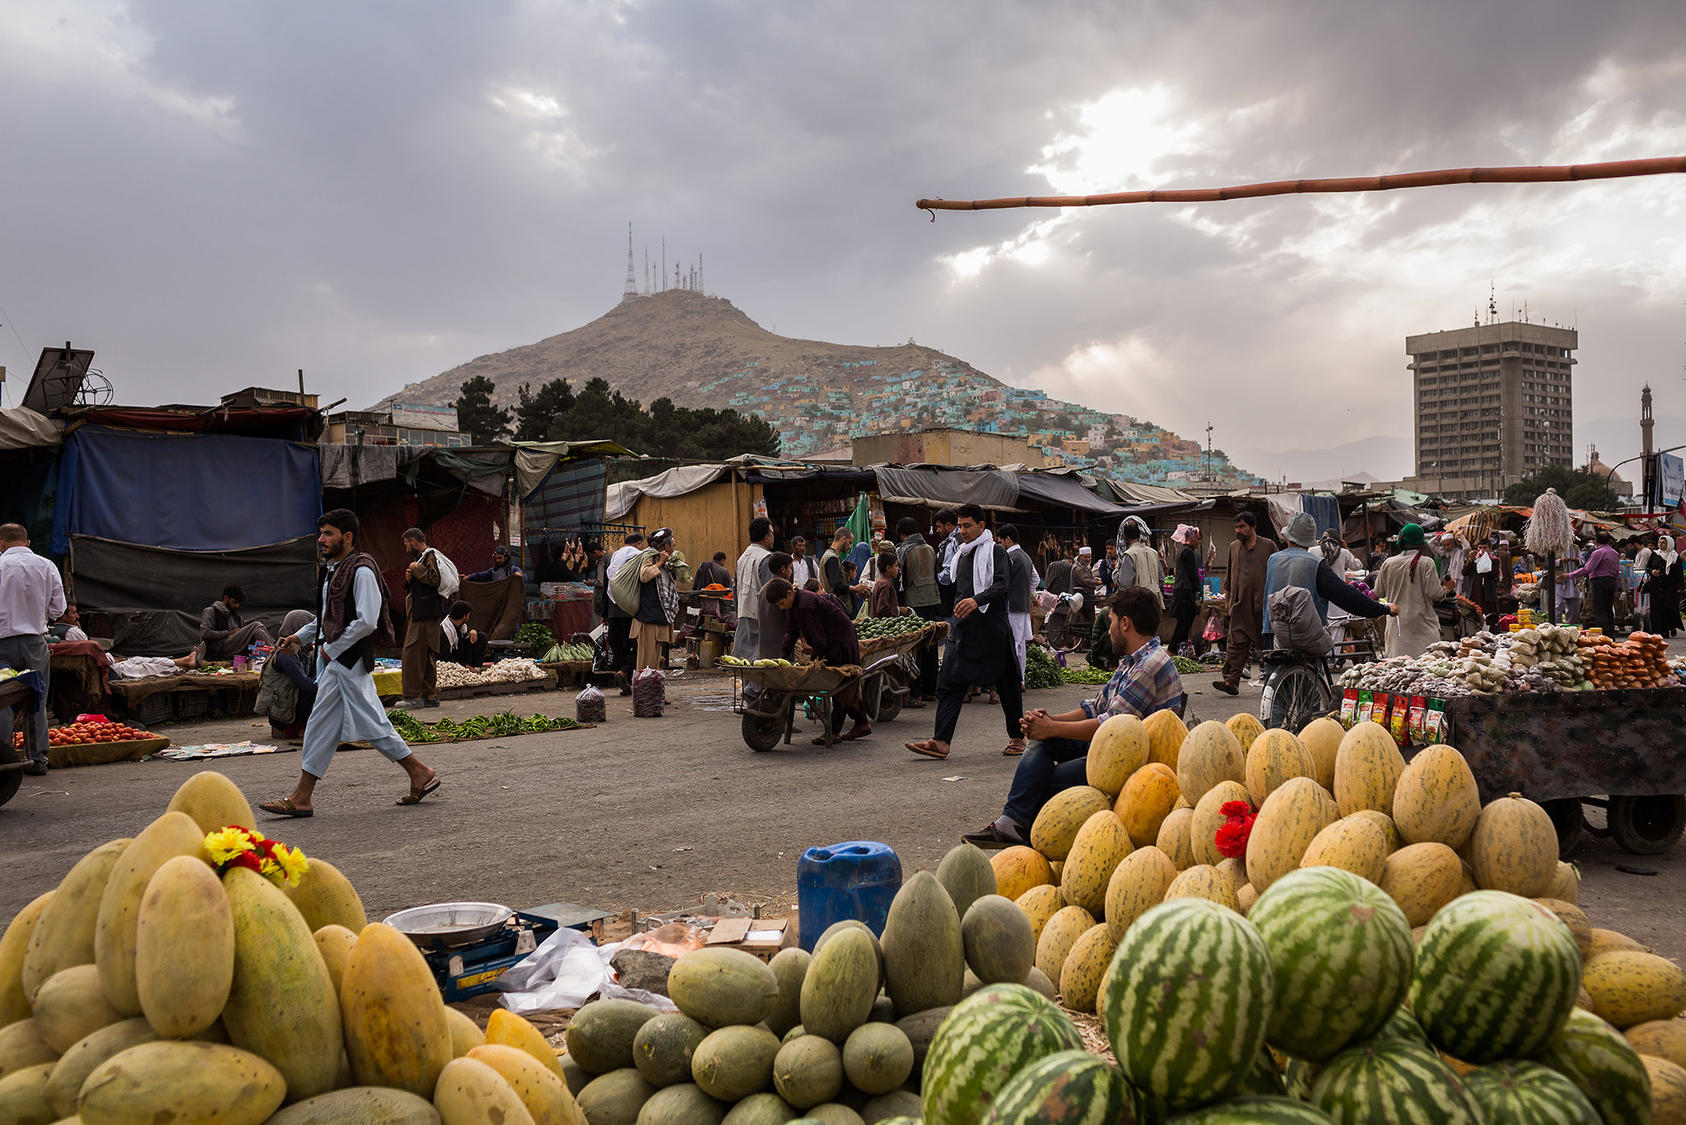 Customers shop for fruits at the retail market along Kabul river in Afghanistan in 2017. (Jim Huylebroek/The New York Times)